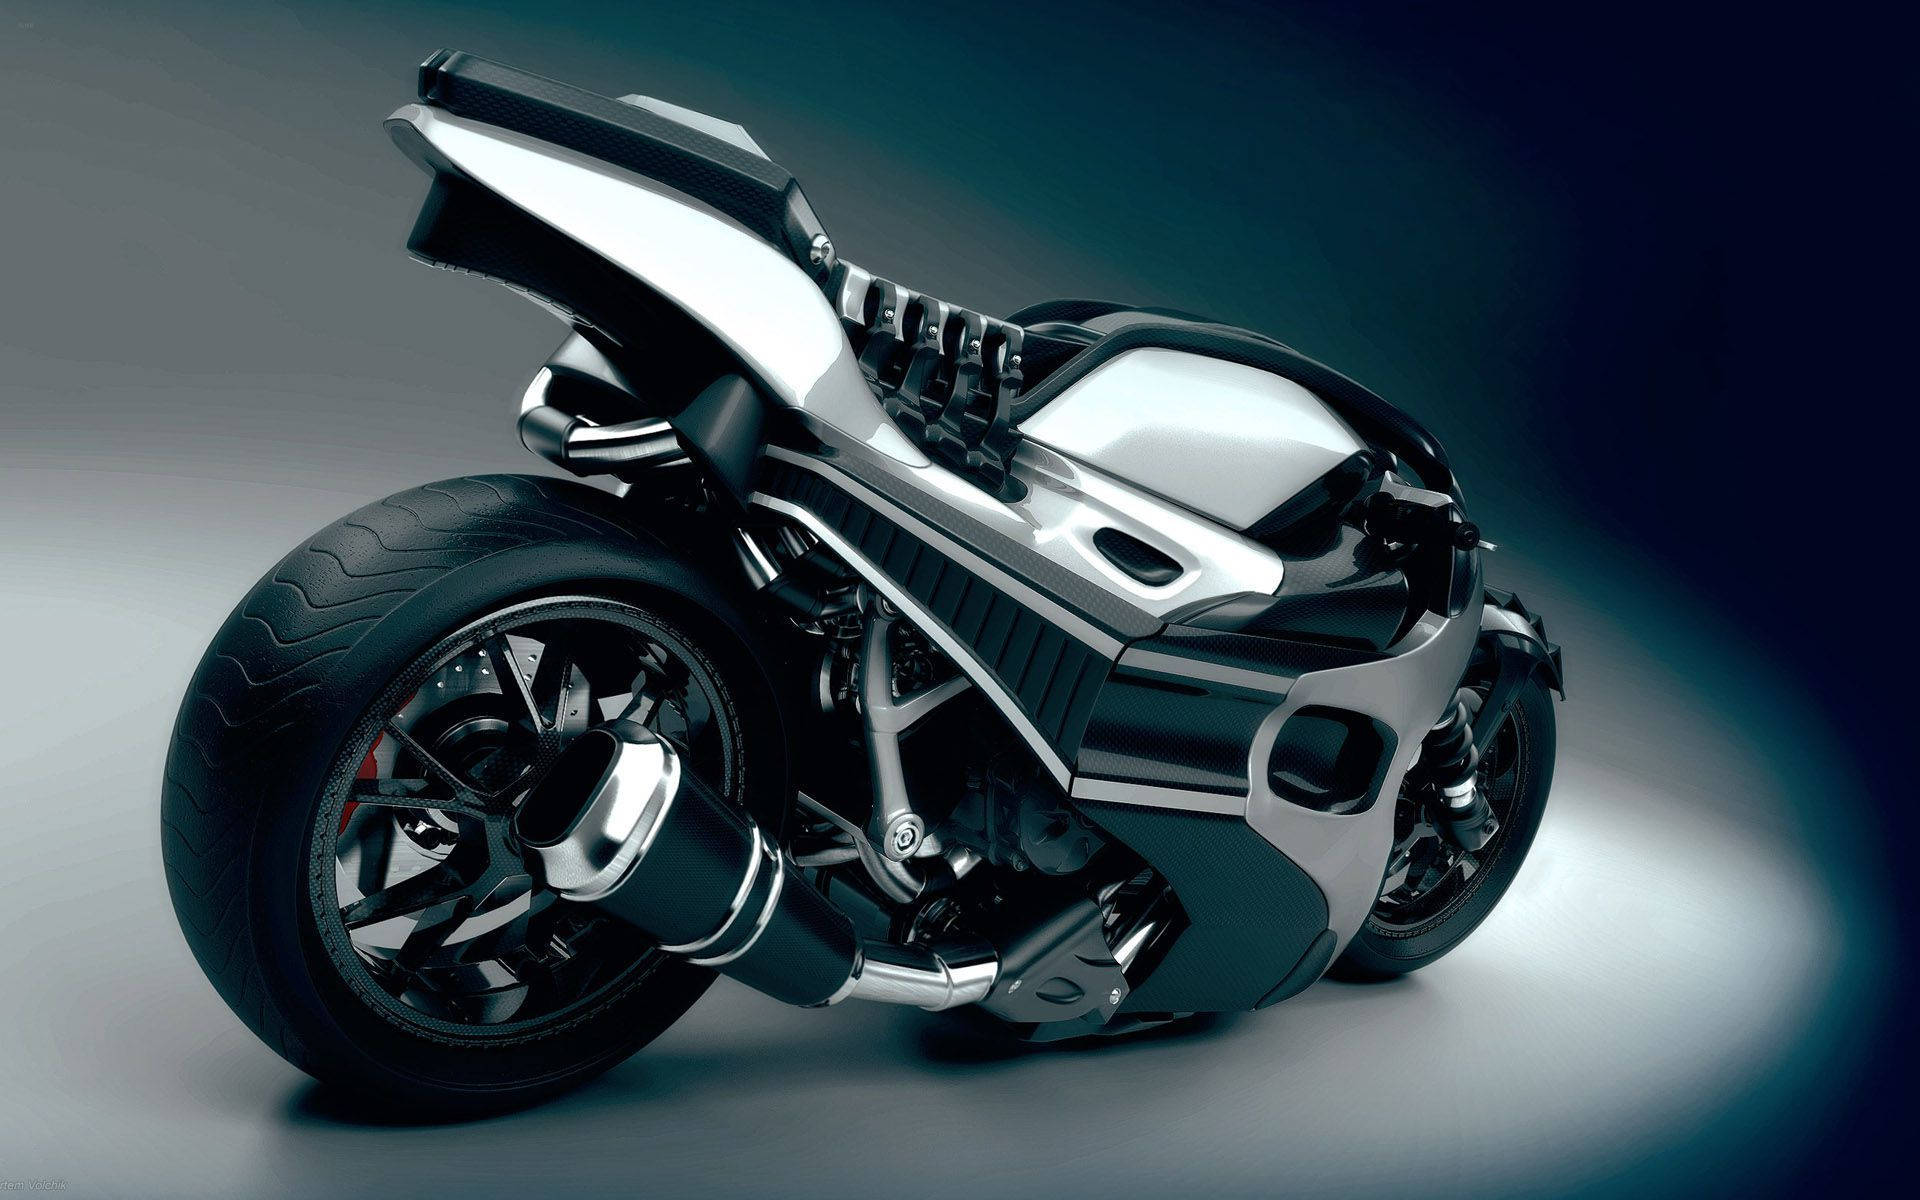 A Black And Silver Motorcycle Is Shown In A Dark Room Wallpaper